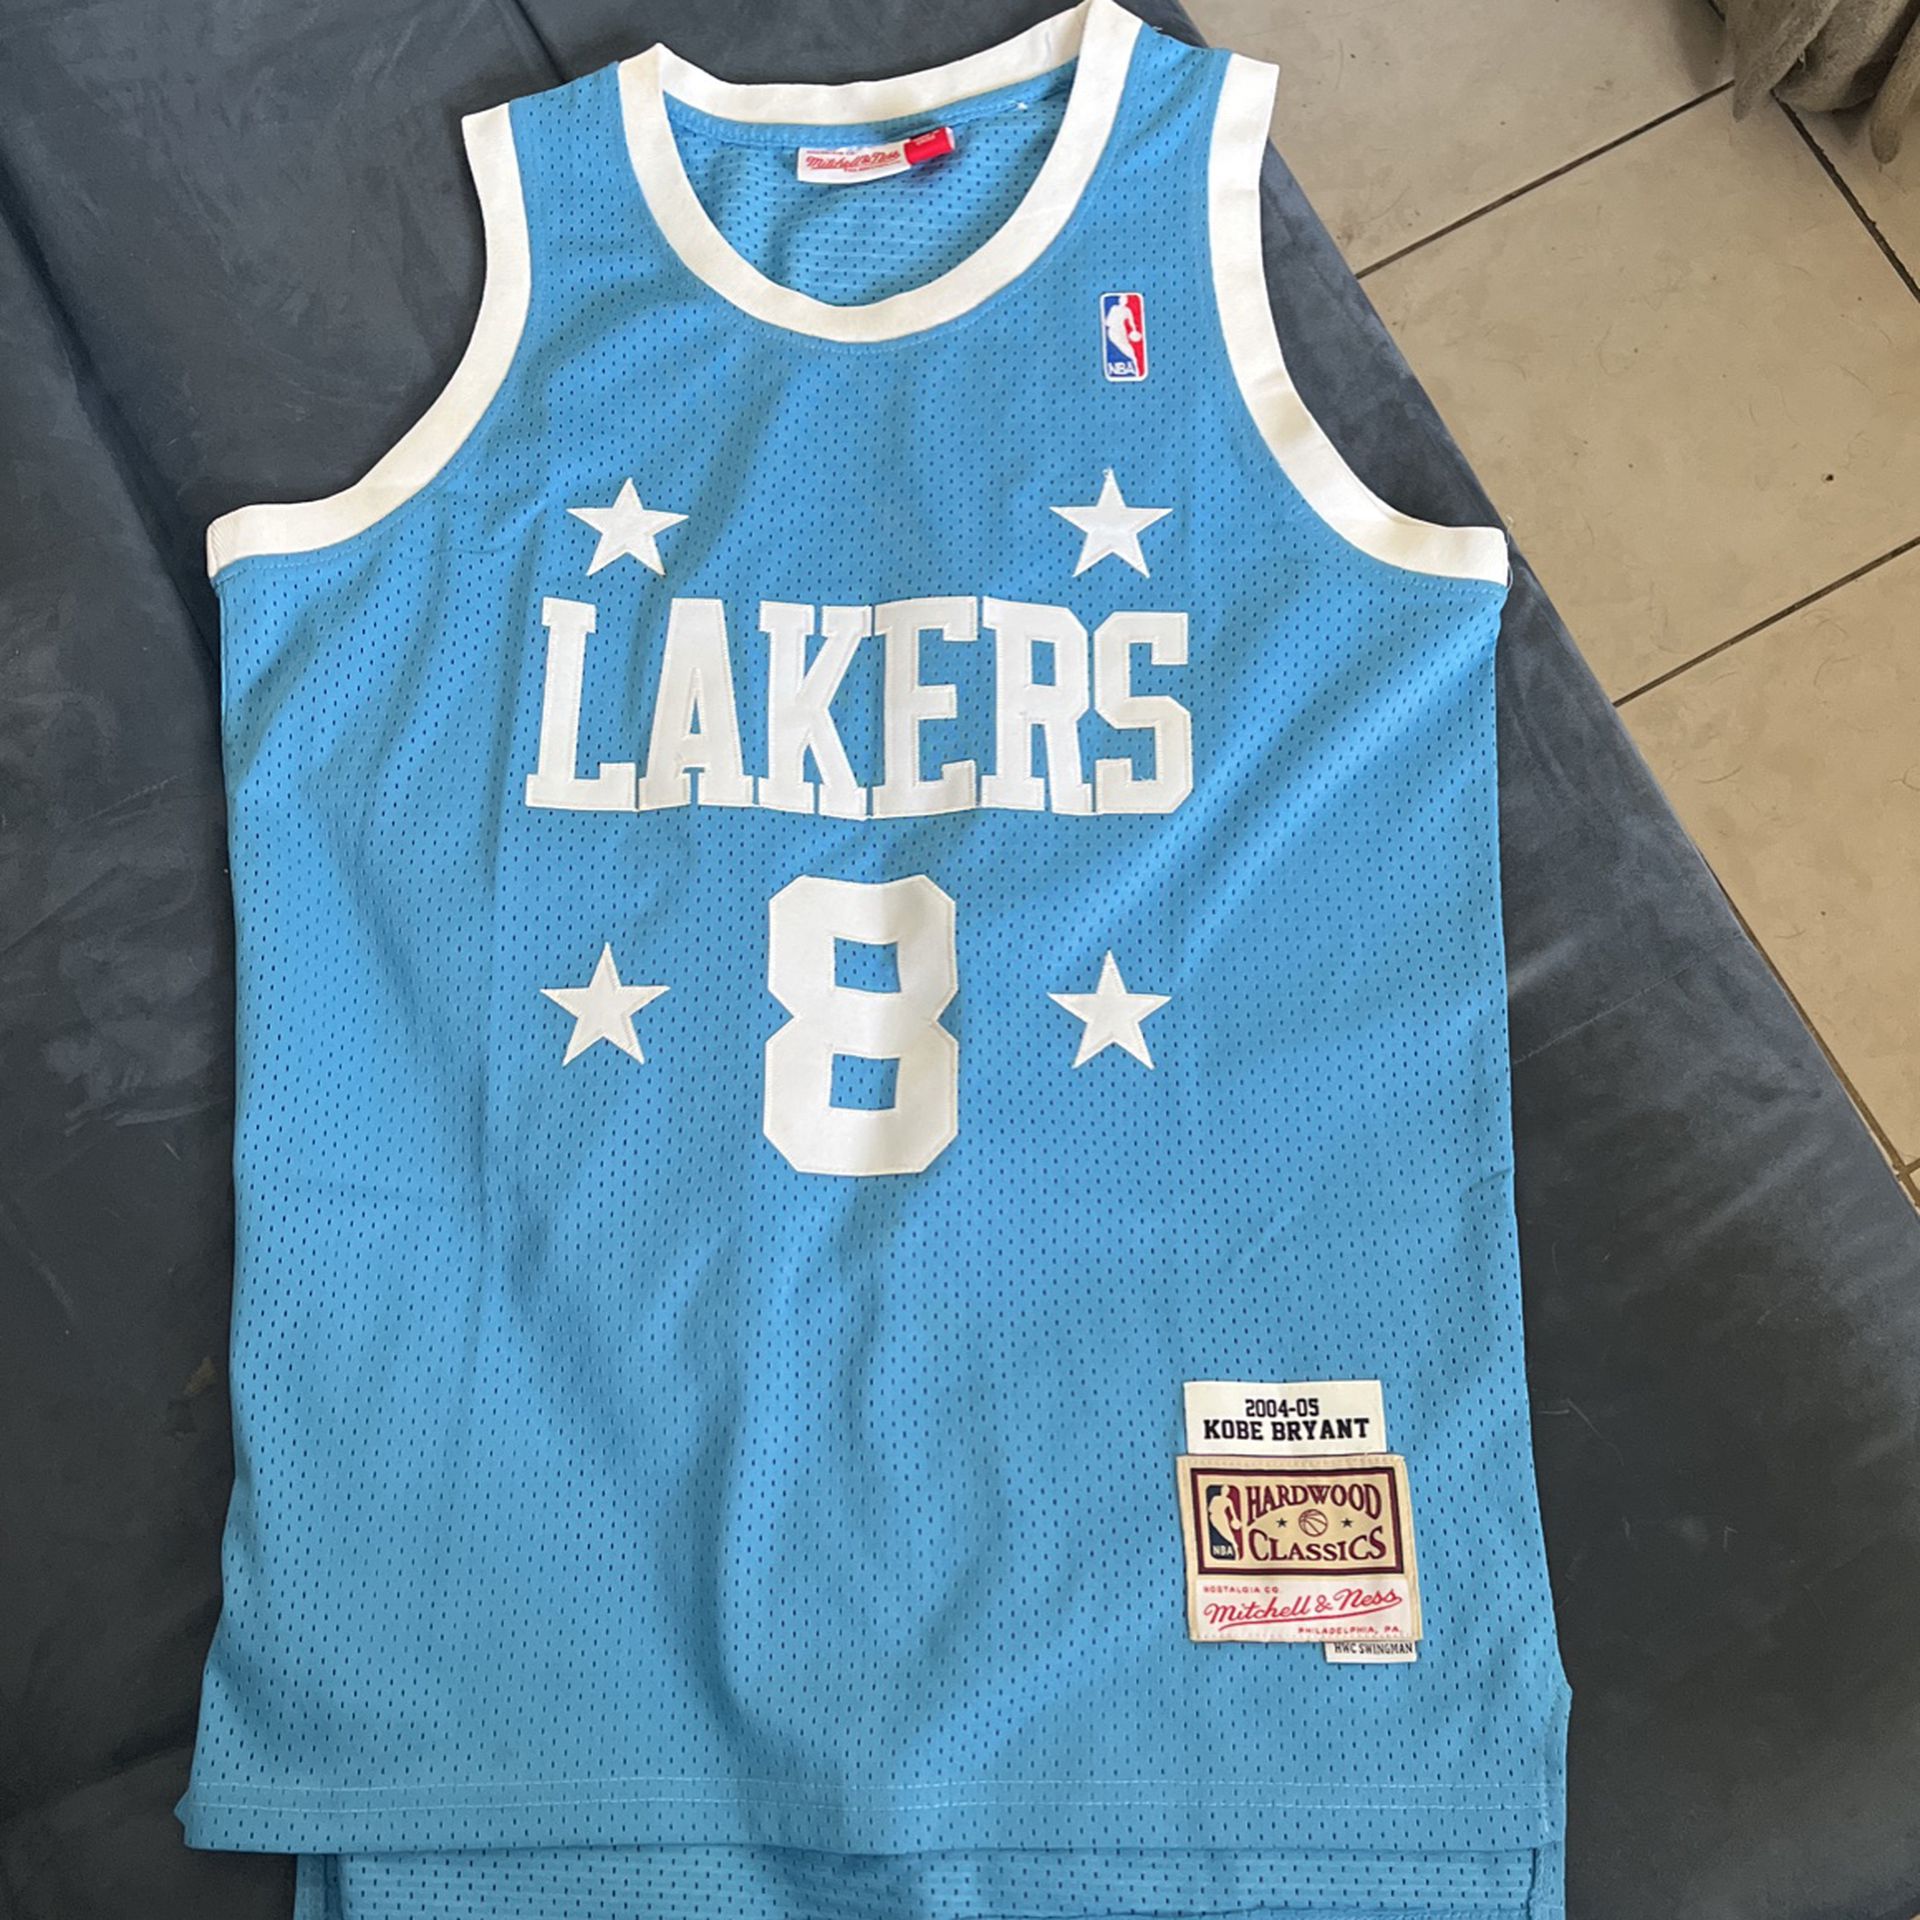 60th anniversary special edition Lakers Jersey for Sale in Pomona, CA -  OfferUp